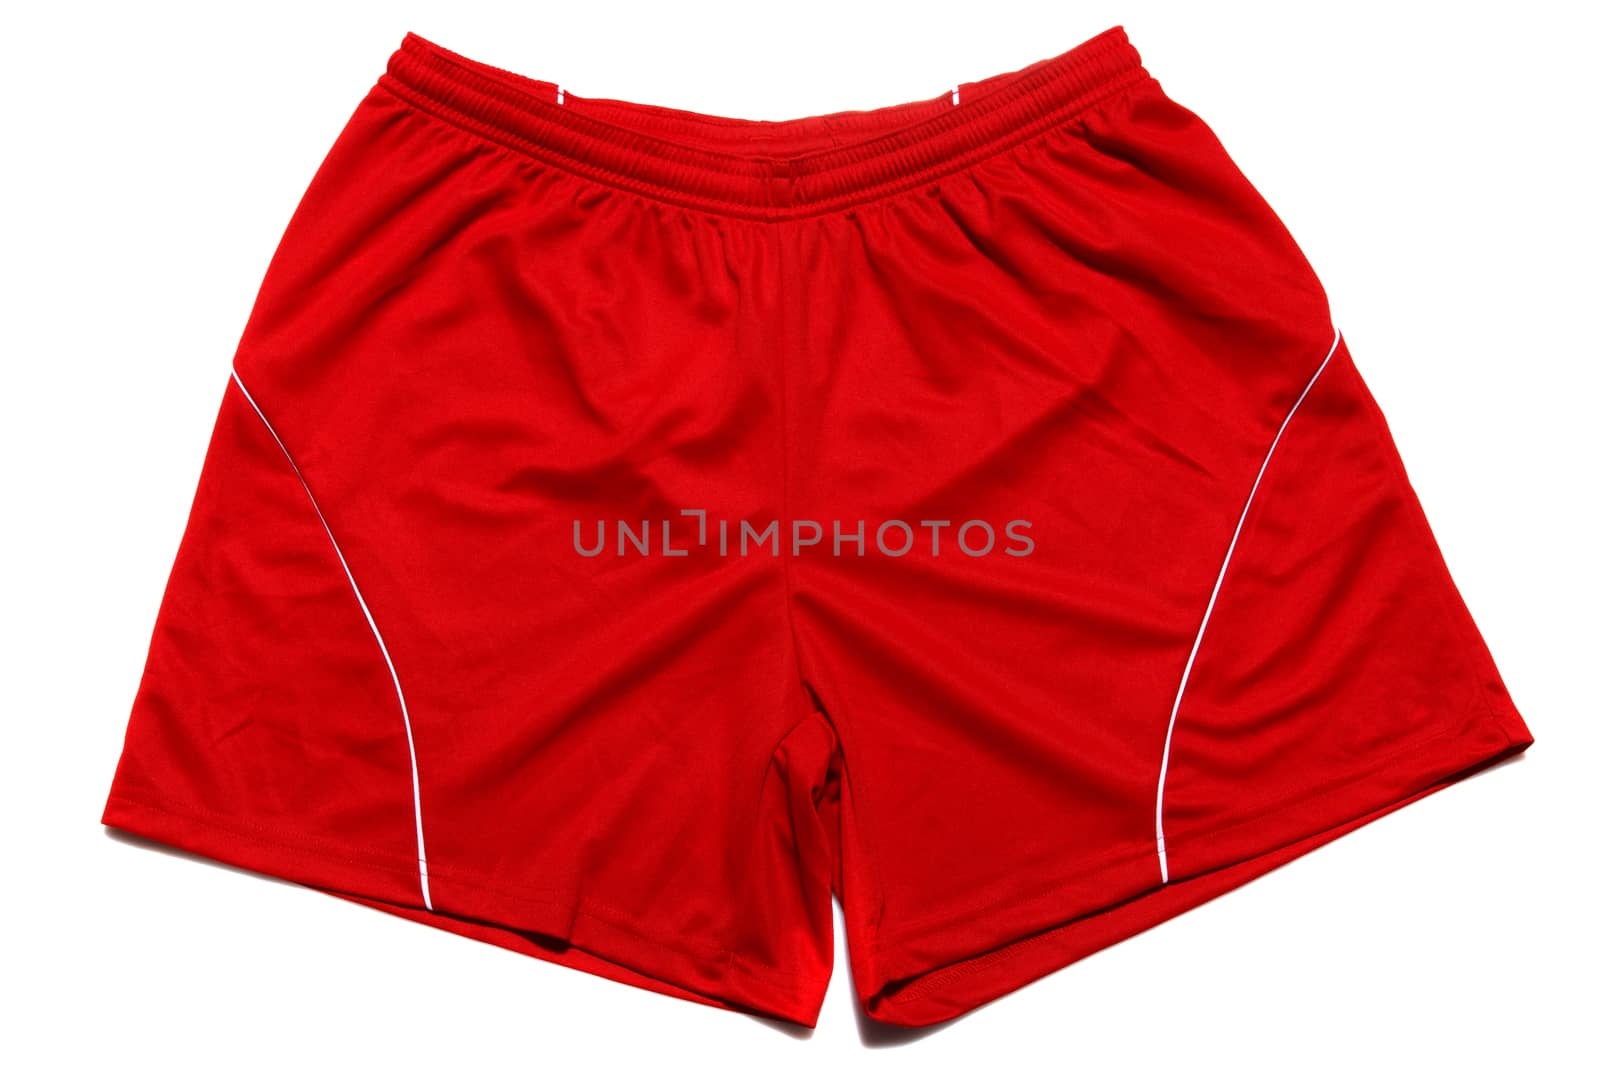 red sports shorts on a white background